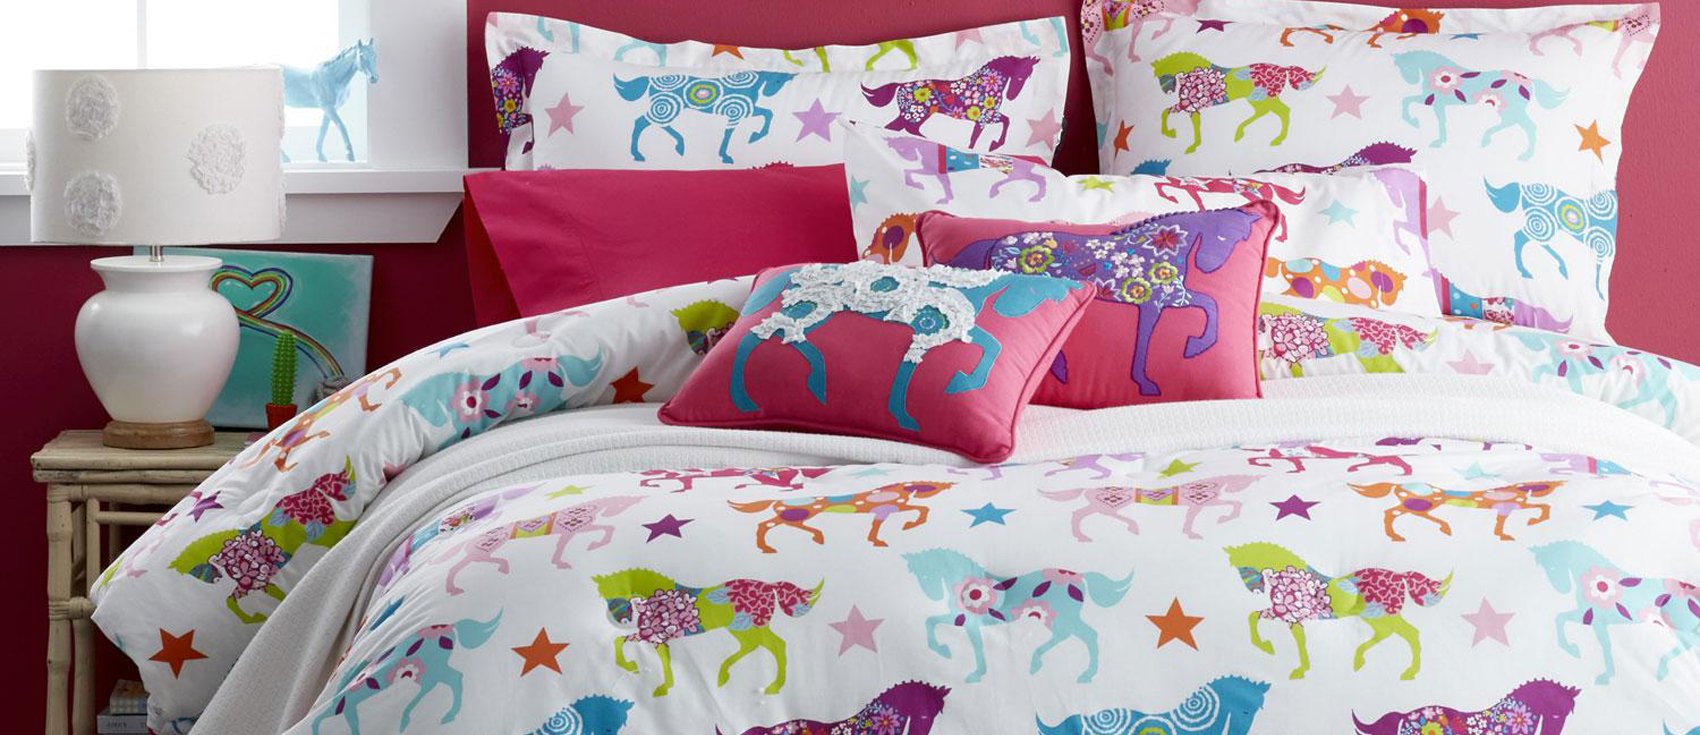 Girls Horse Bedding Cowgirl Theme Bedroom Pony Bedding Sets throughout proportions 1700 X 735